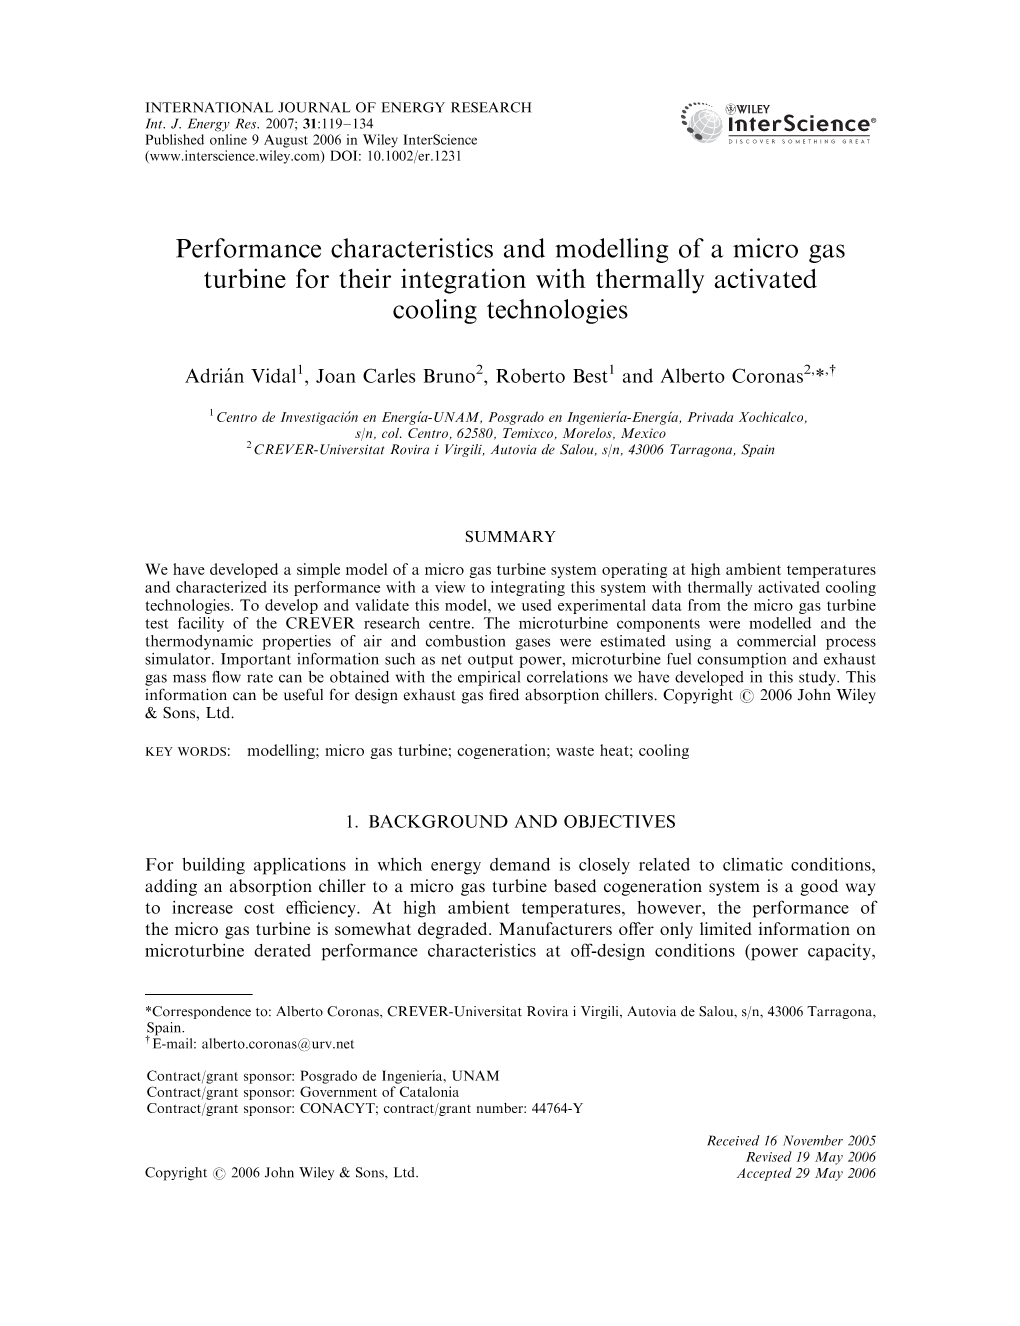 Performance Characteristics and Modelling of a Micro Gas Turbine for Their Integration with Thermally Activated Cooling Technologies